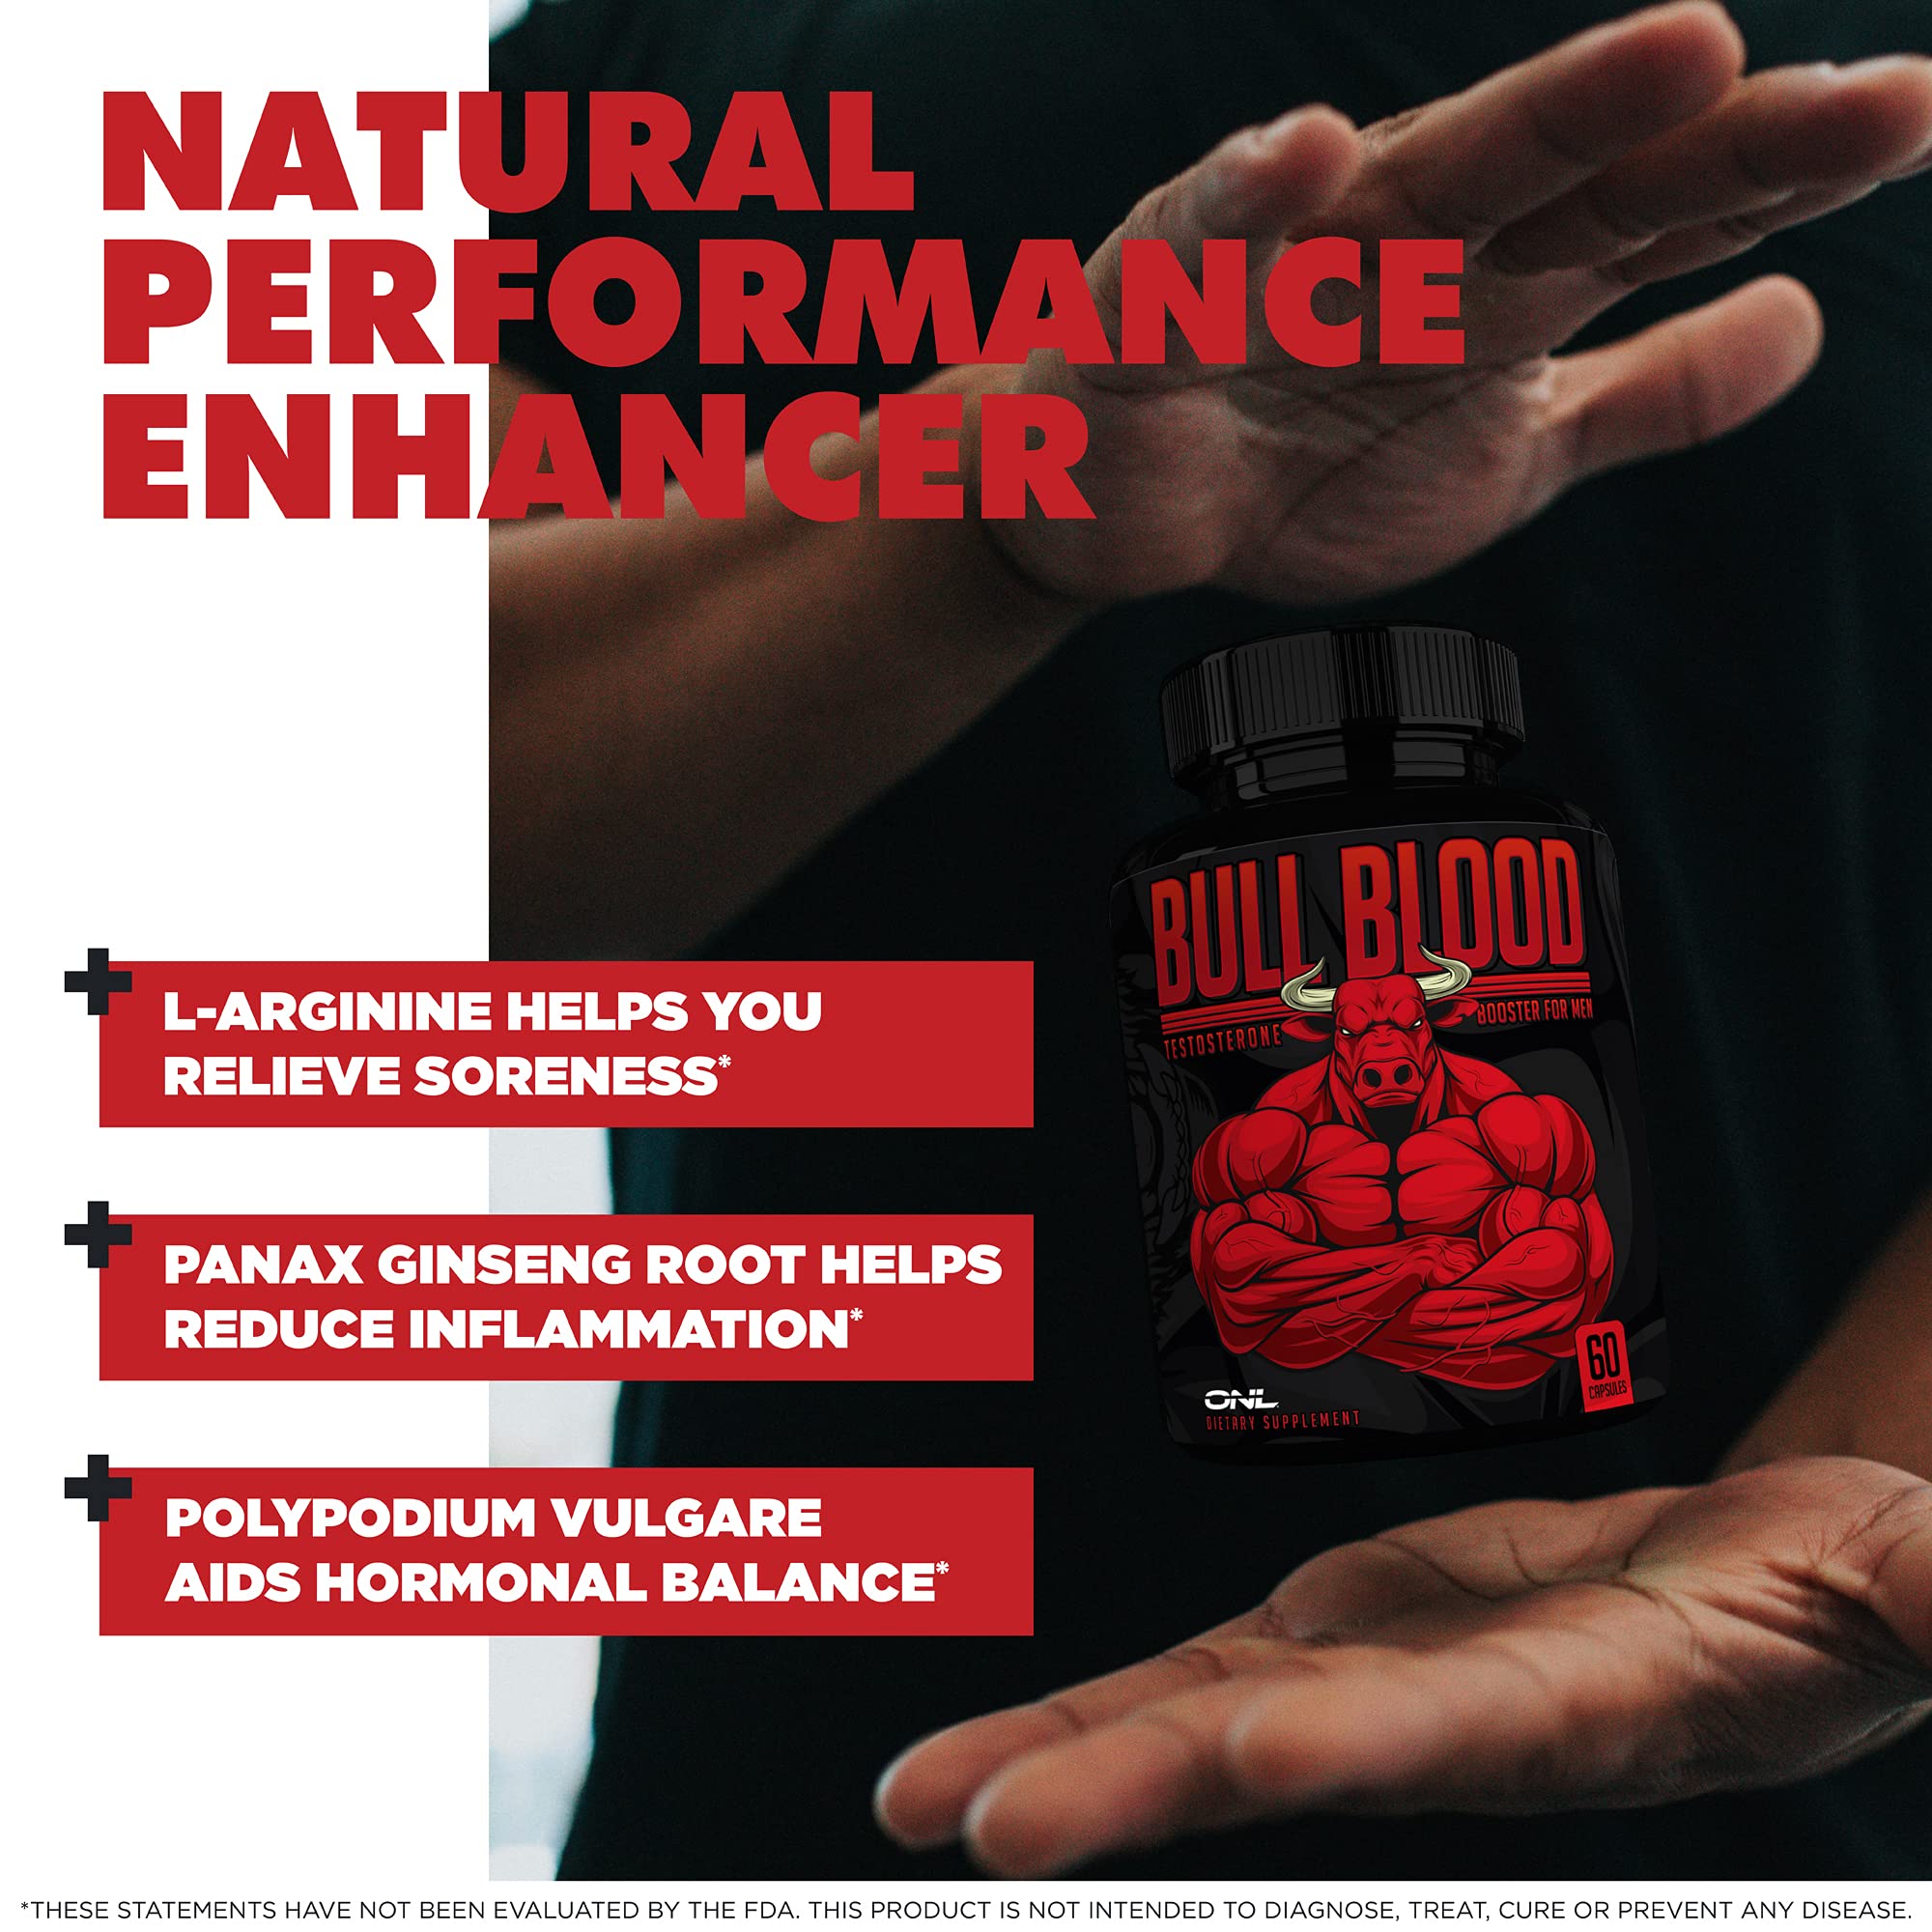 Bull Blood Testosterone Booster for Men - Male Enhancing Test Booster Pills for Stamina & Endurance w/ Maca Root, Horny Goat Weed & Tribulus Terrestris Extract, Tongkat ali Supplement for Men - 60Ct